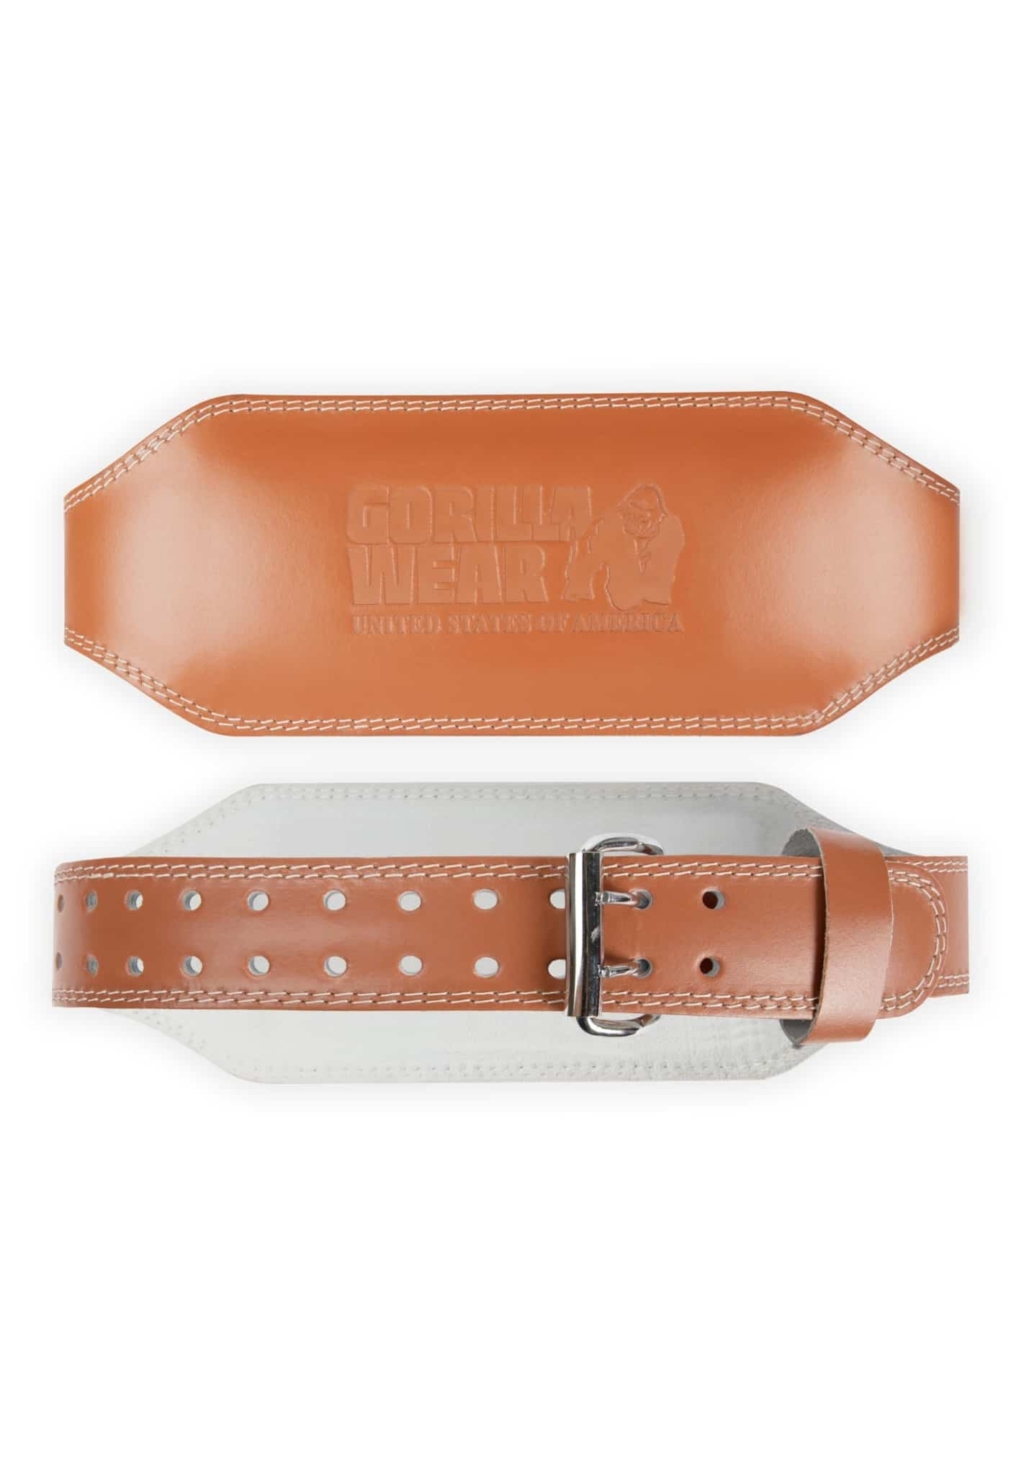 99107908 padded leather lifting belt 6inch brown 18 scaled